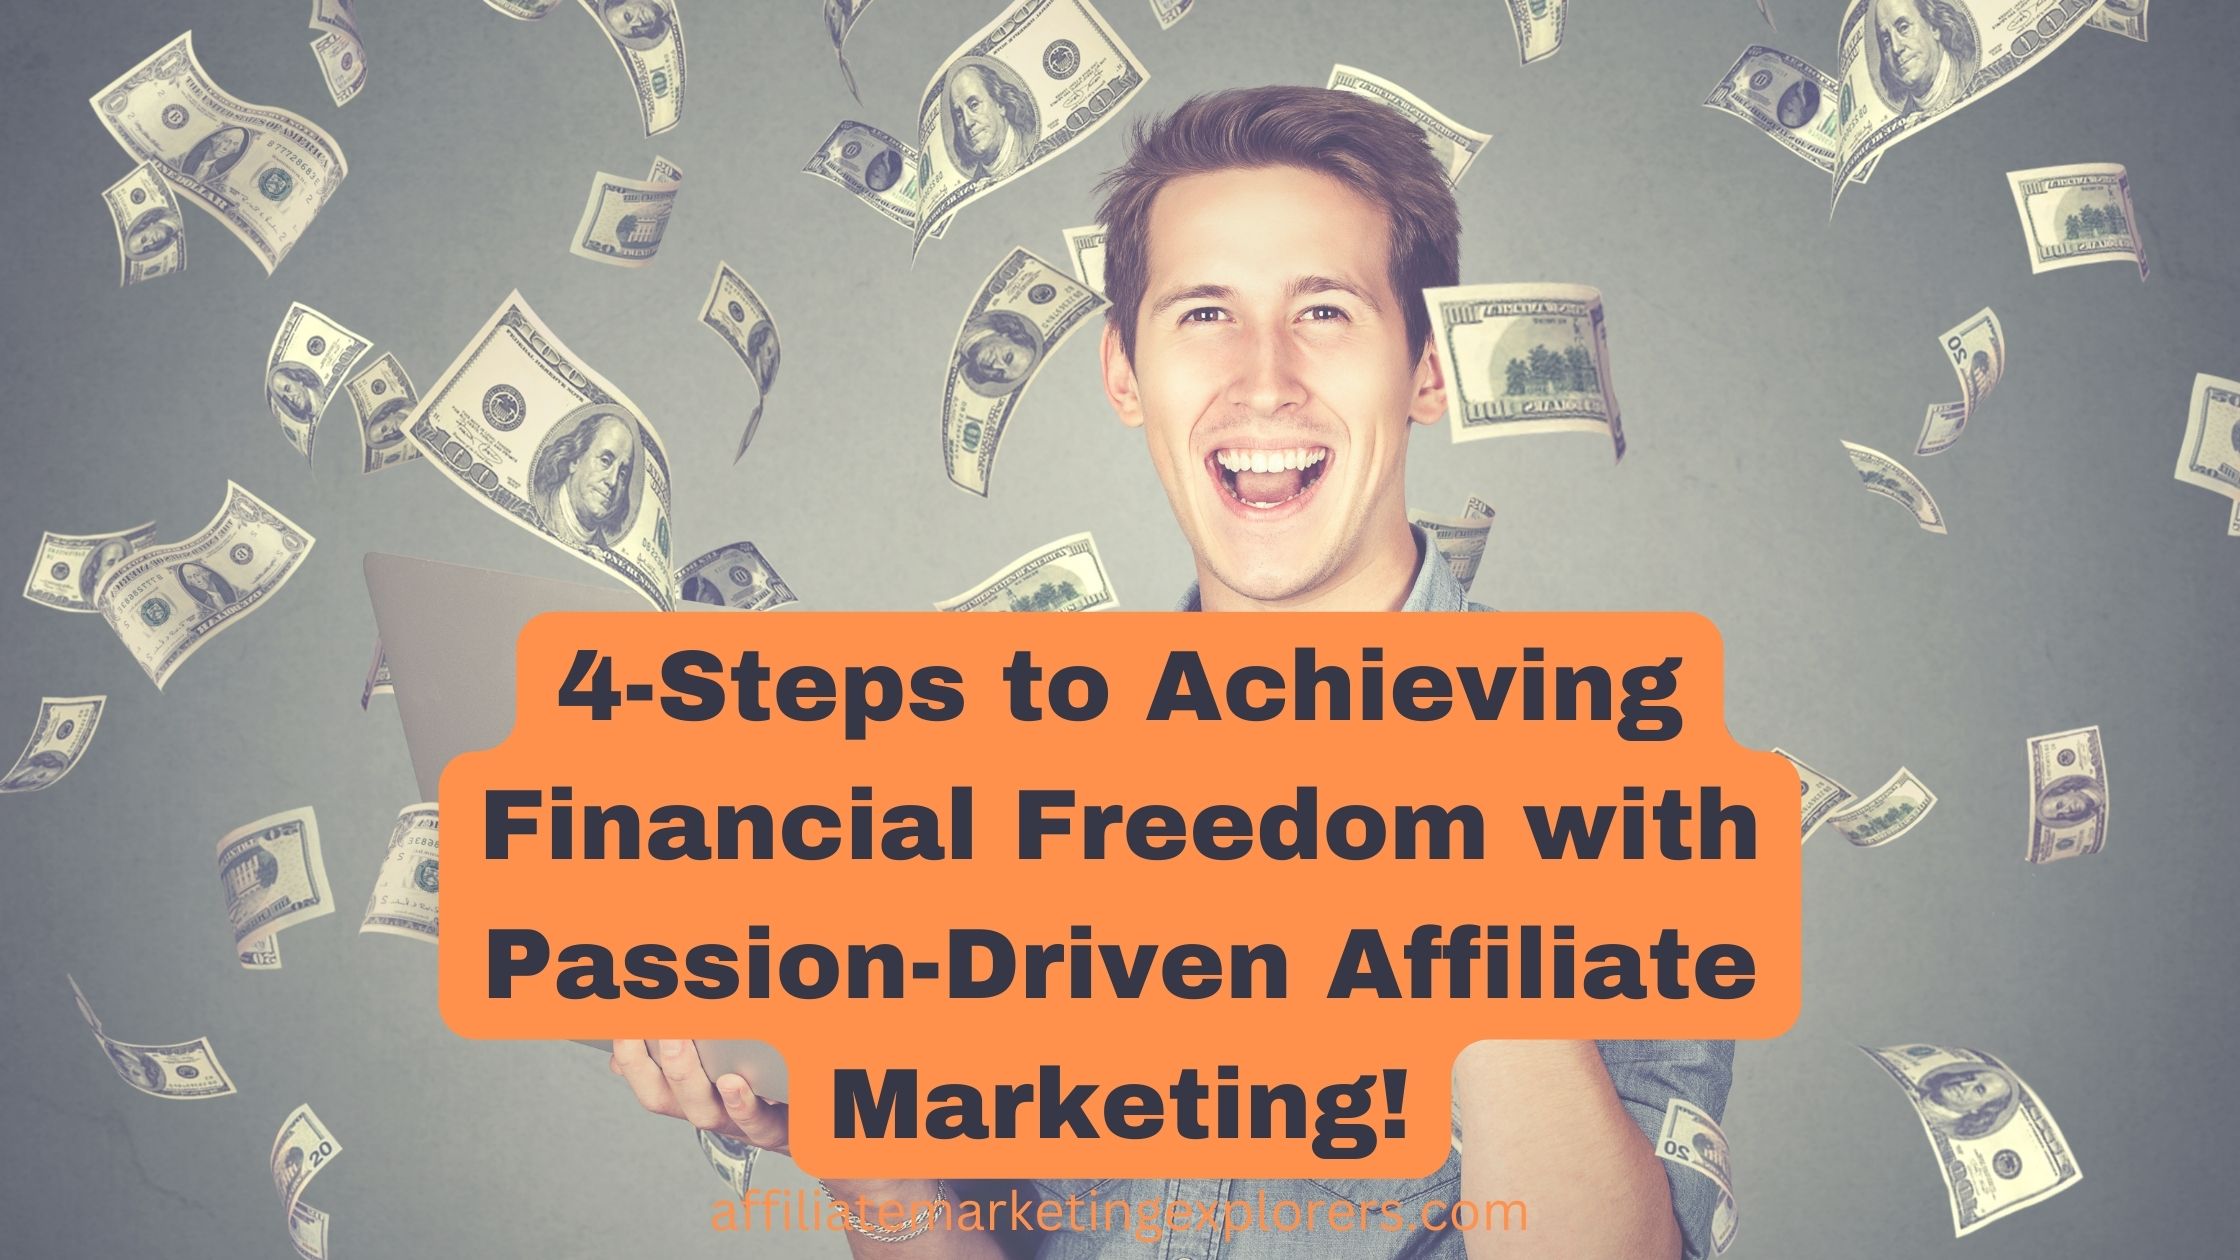 4-Steps to Achieving Financial Freedom with Passion-Driven Affiliate Marketing!